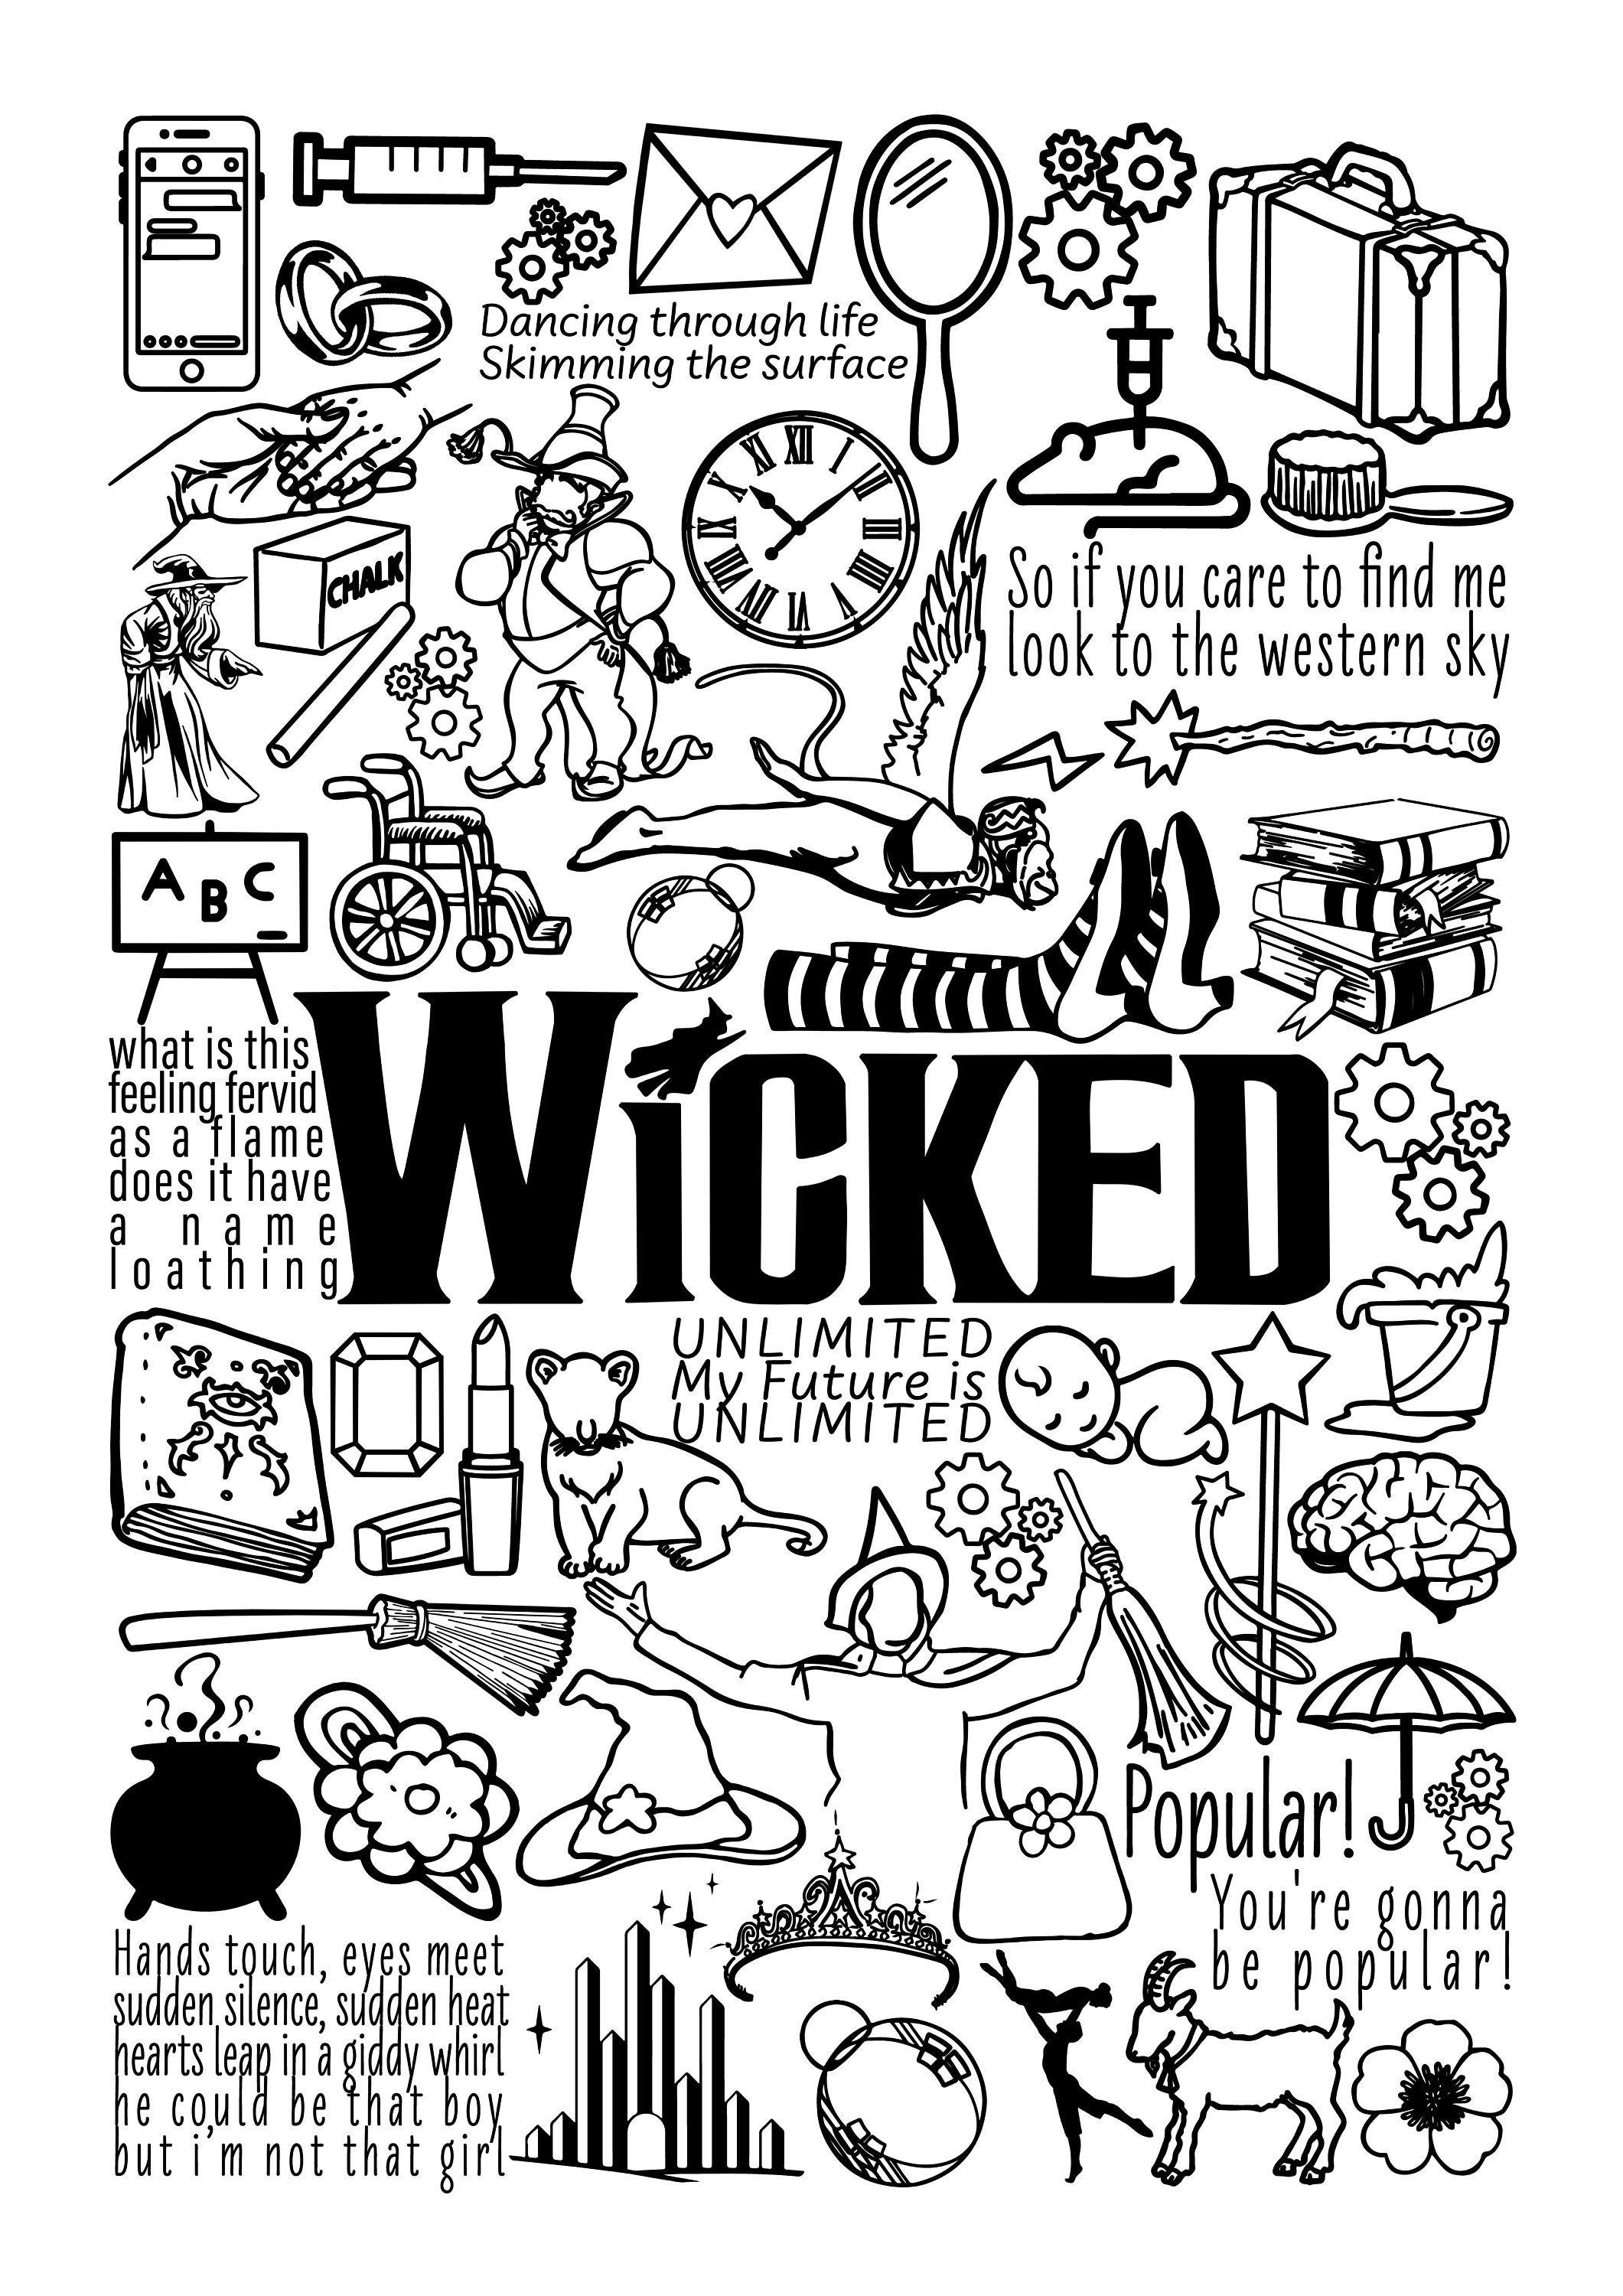 wicked-musical-poster-matte-print-black-and-white-etsy